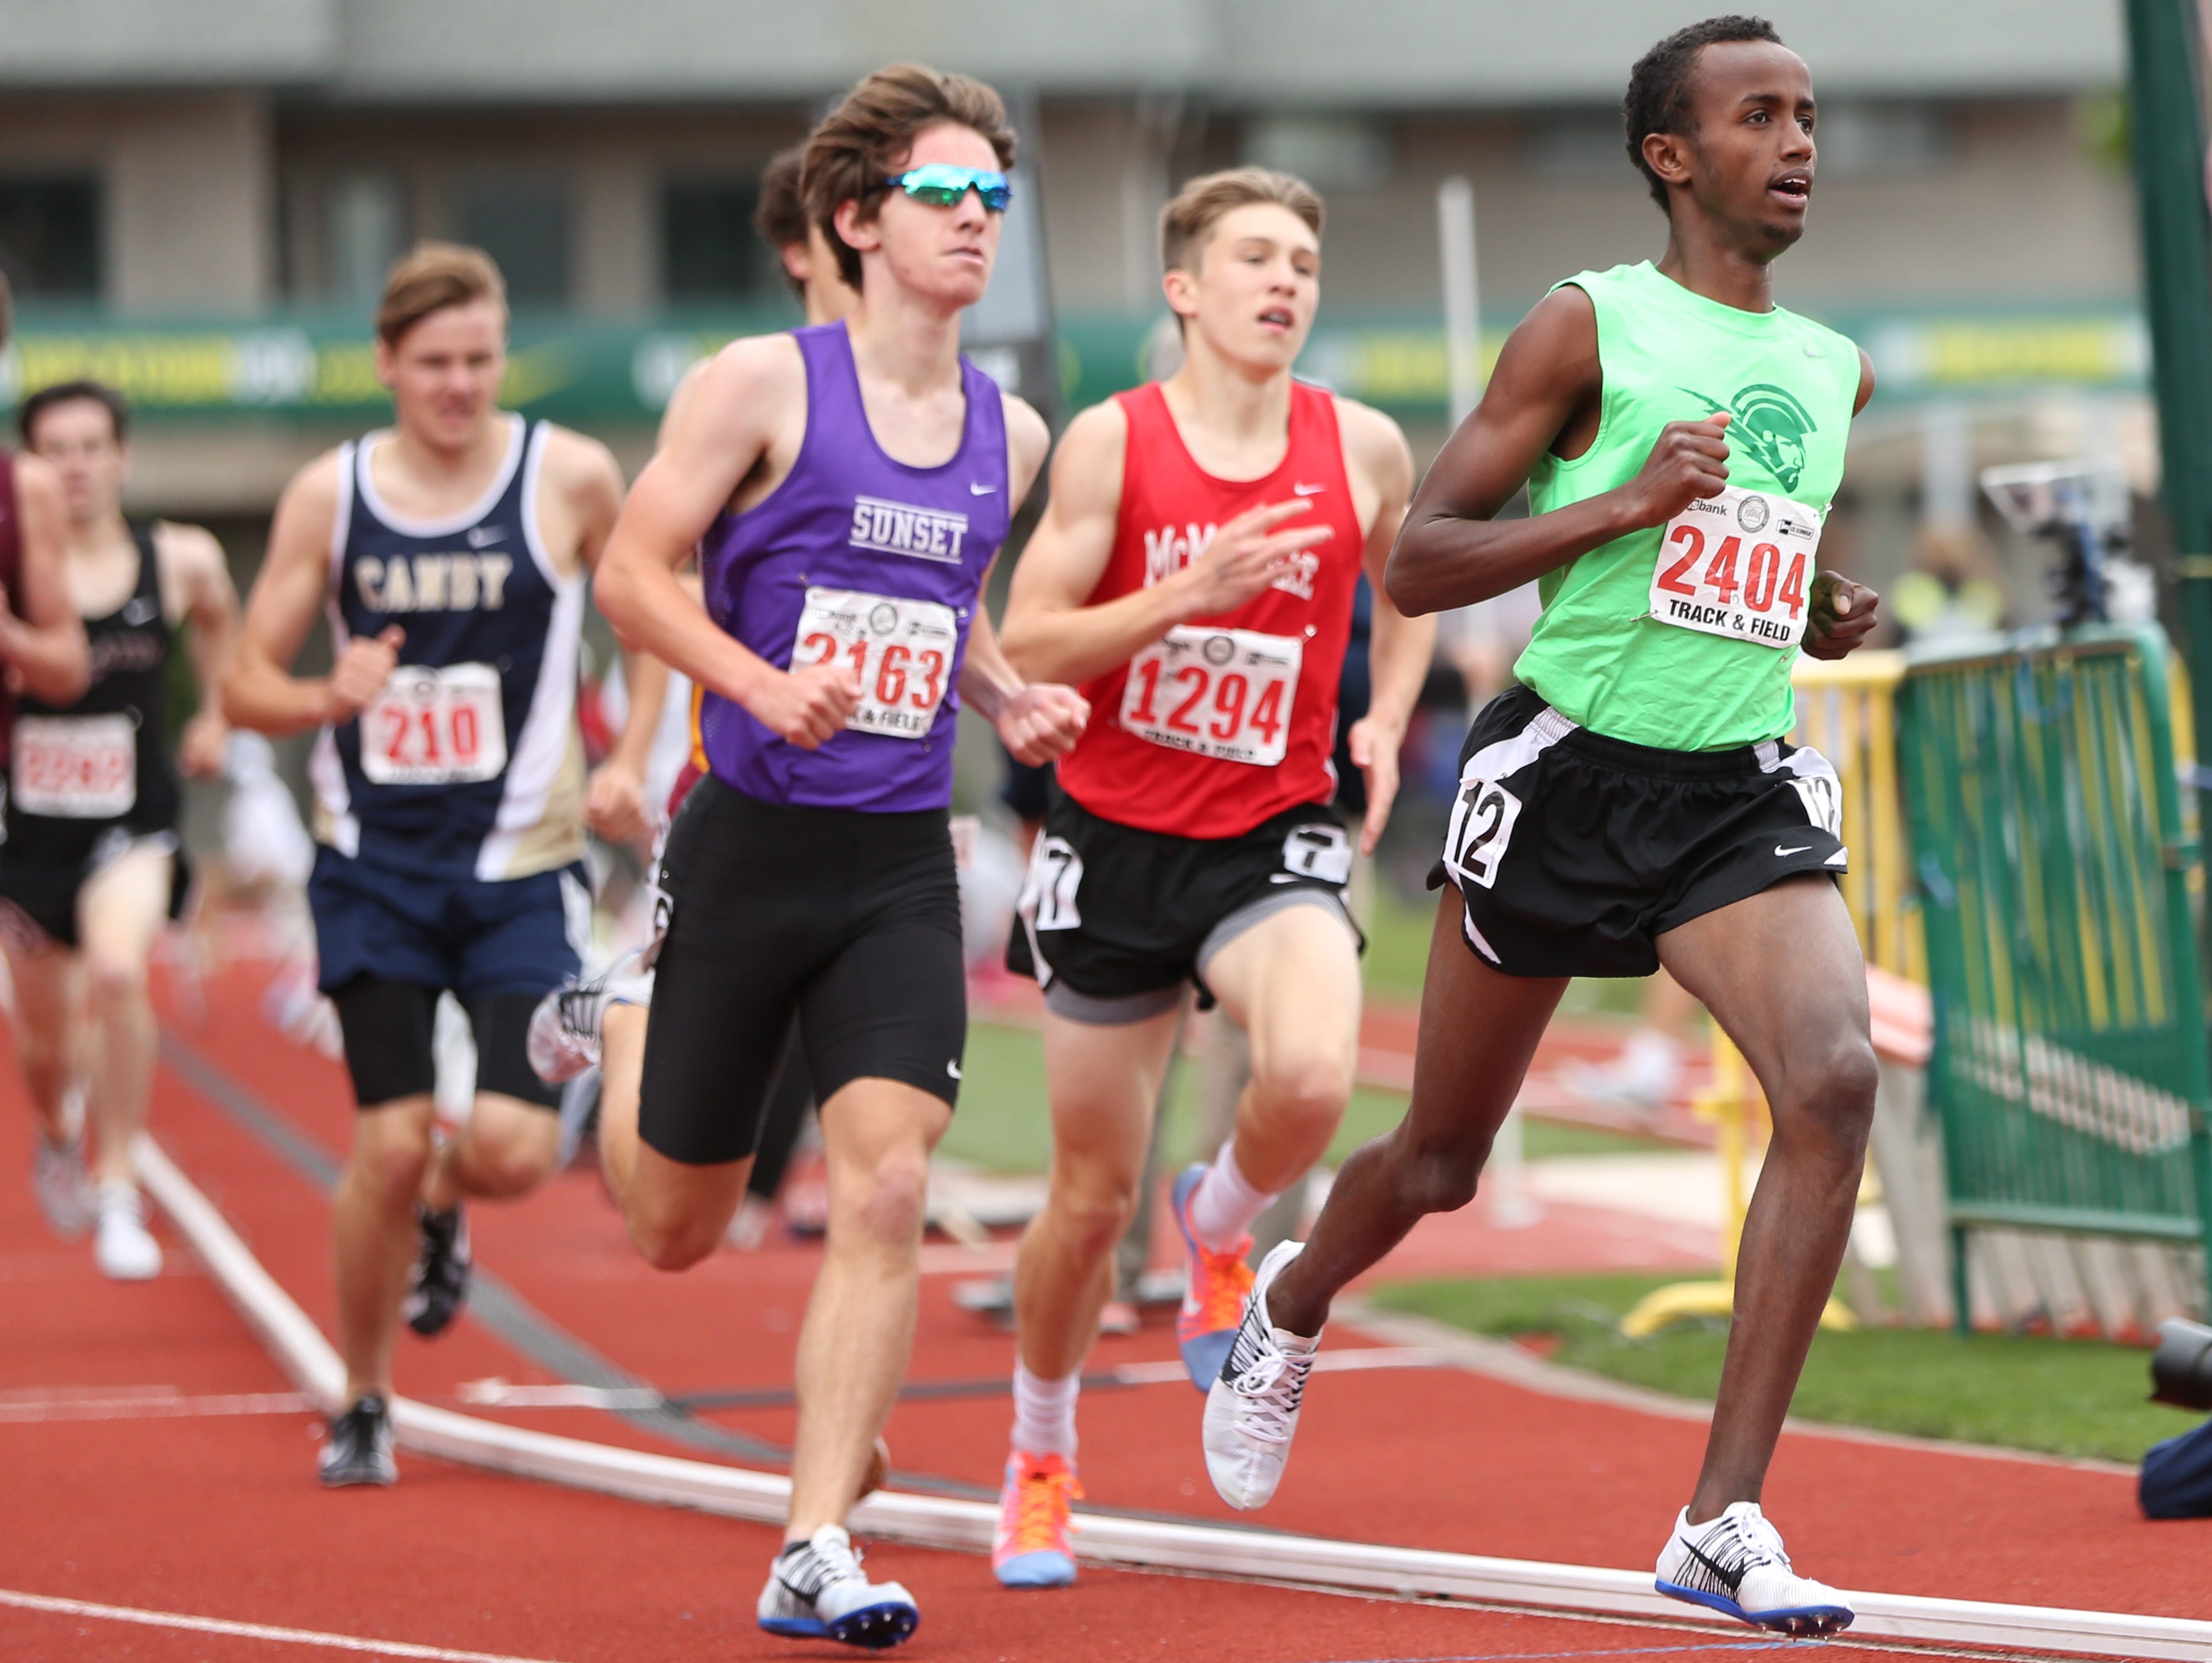 West Salem's Ahmed Muhumed competes in the 1500 meters during the final day of the OSAA Track and Field State Championships at Hayward Field in Eugene, Ore.